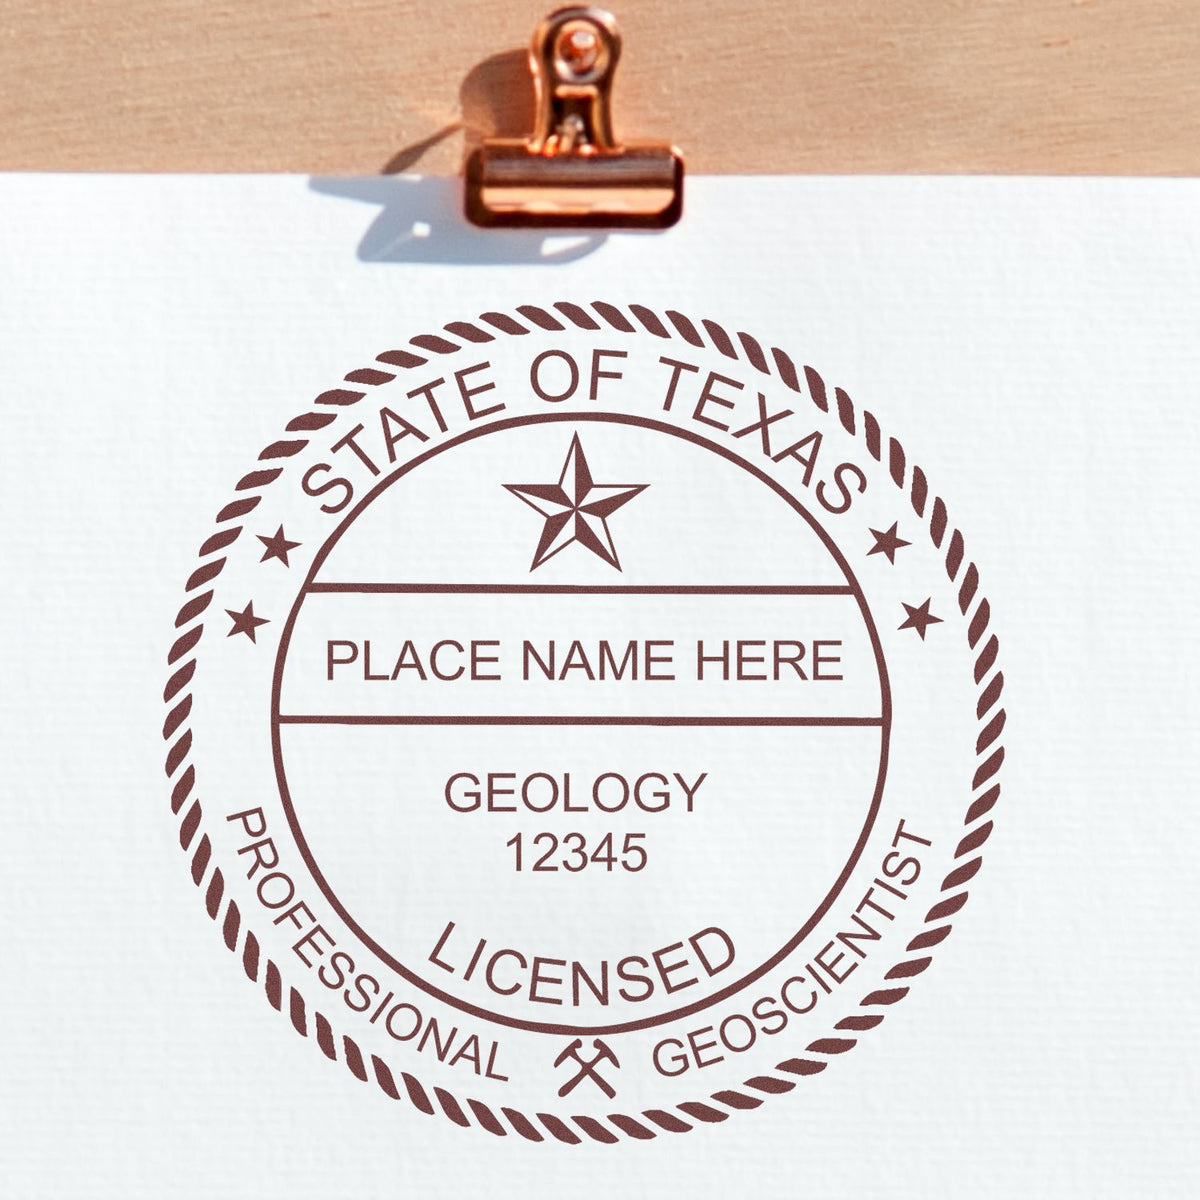 Another Example of a stamped impression of the Digital Texas Geologist Stamp, Electronic Seal for Texas Geologist on a office form